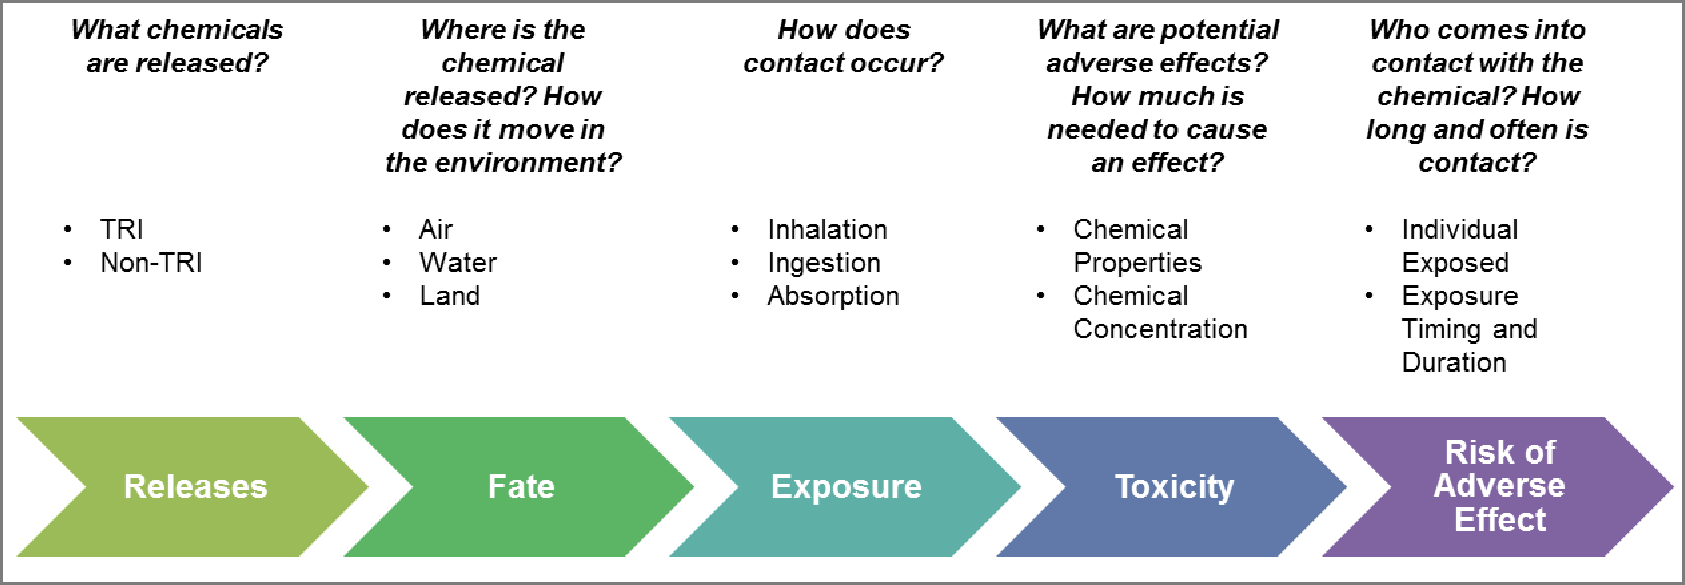 Graphic describing how adding information can help determine the risk of adverse effect